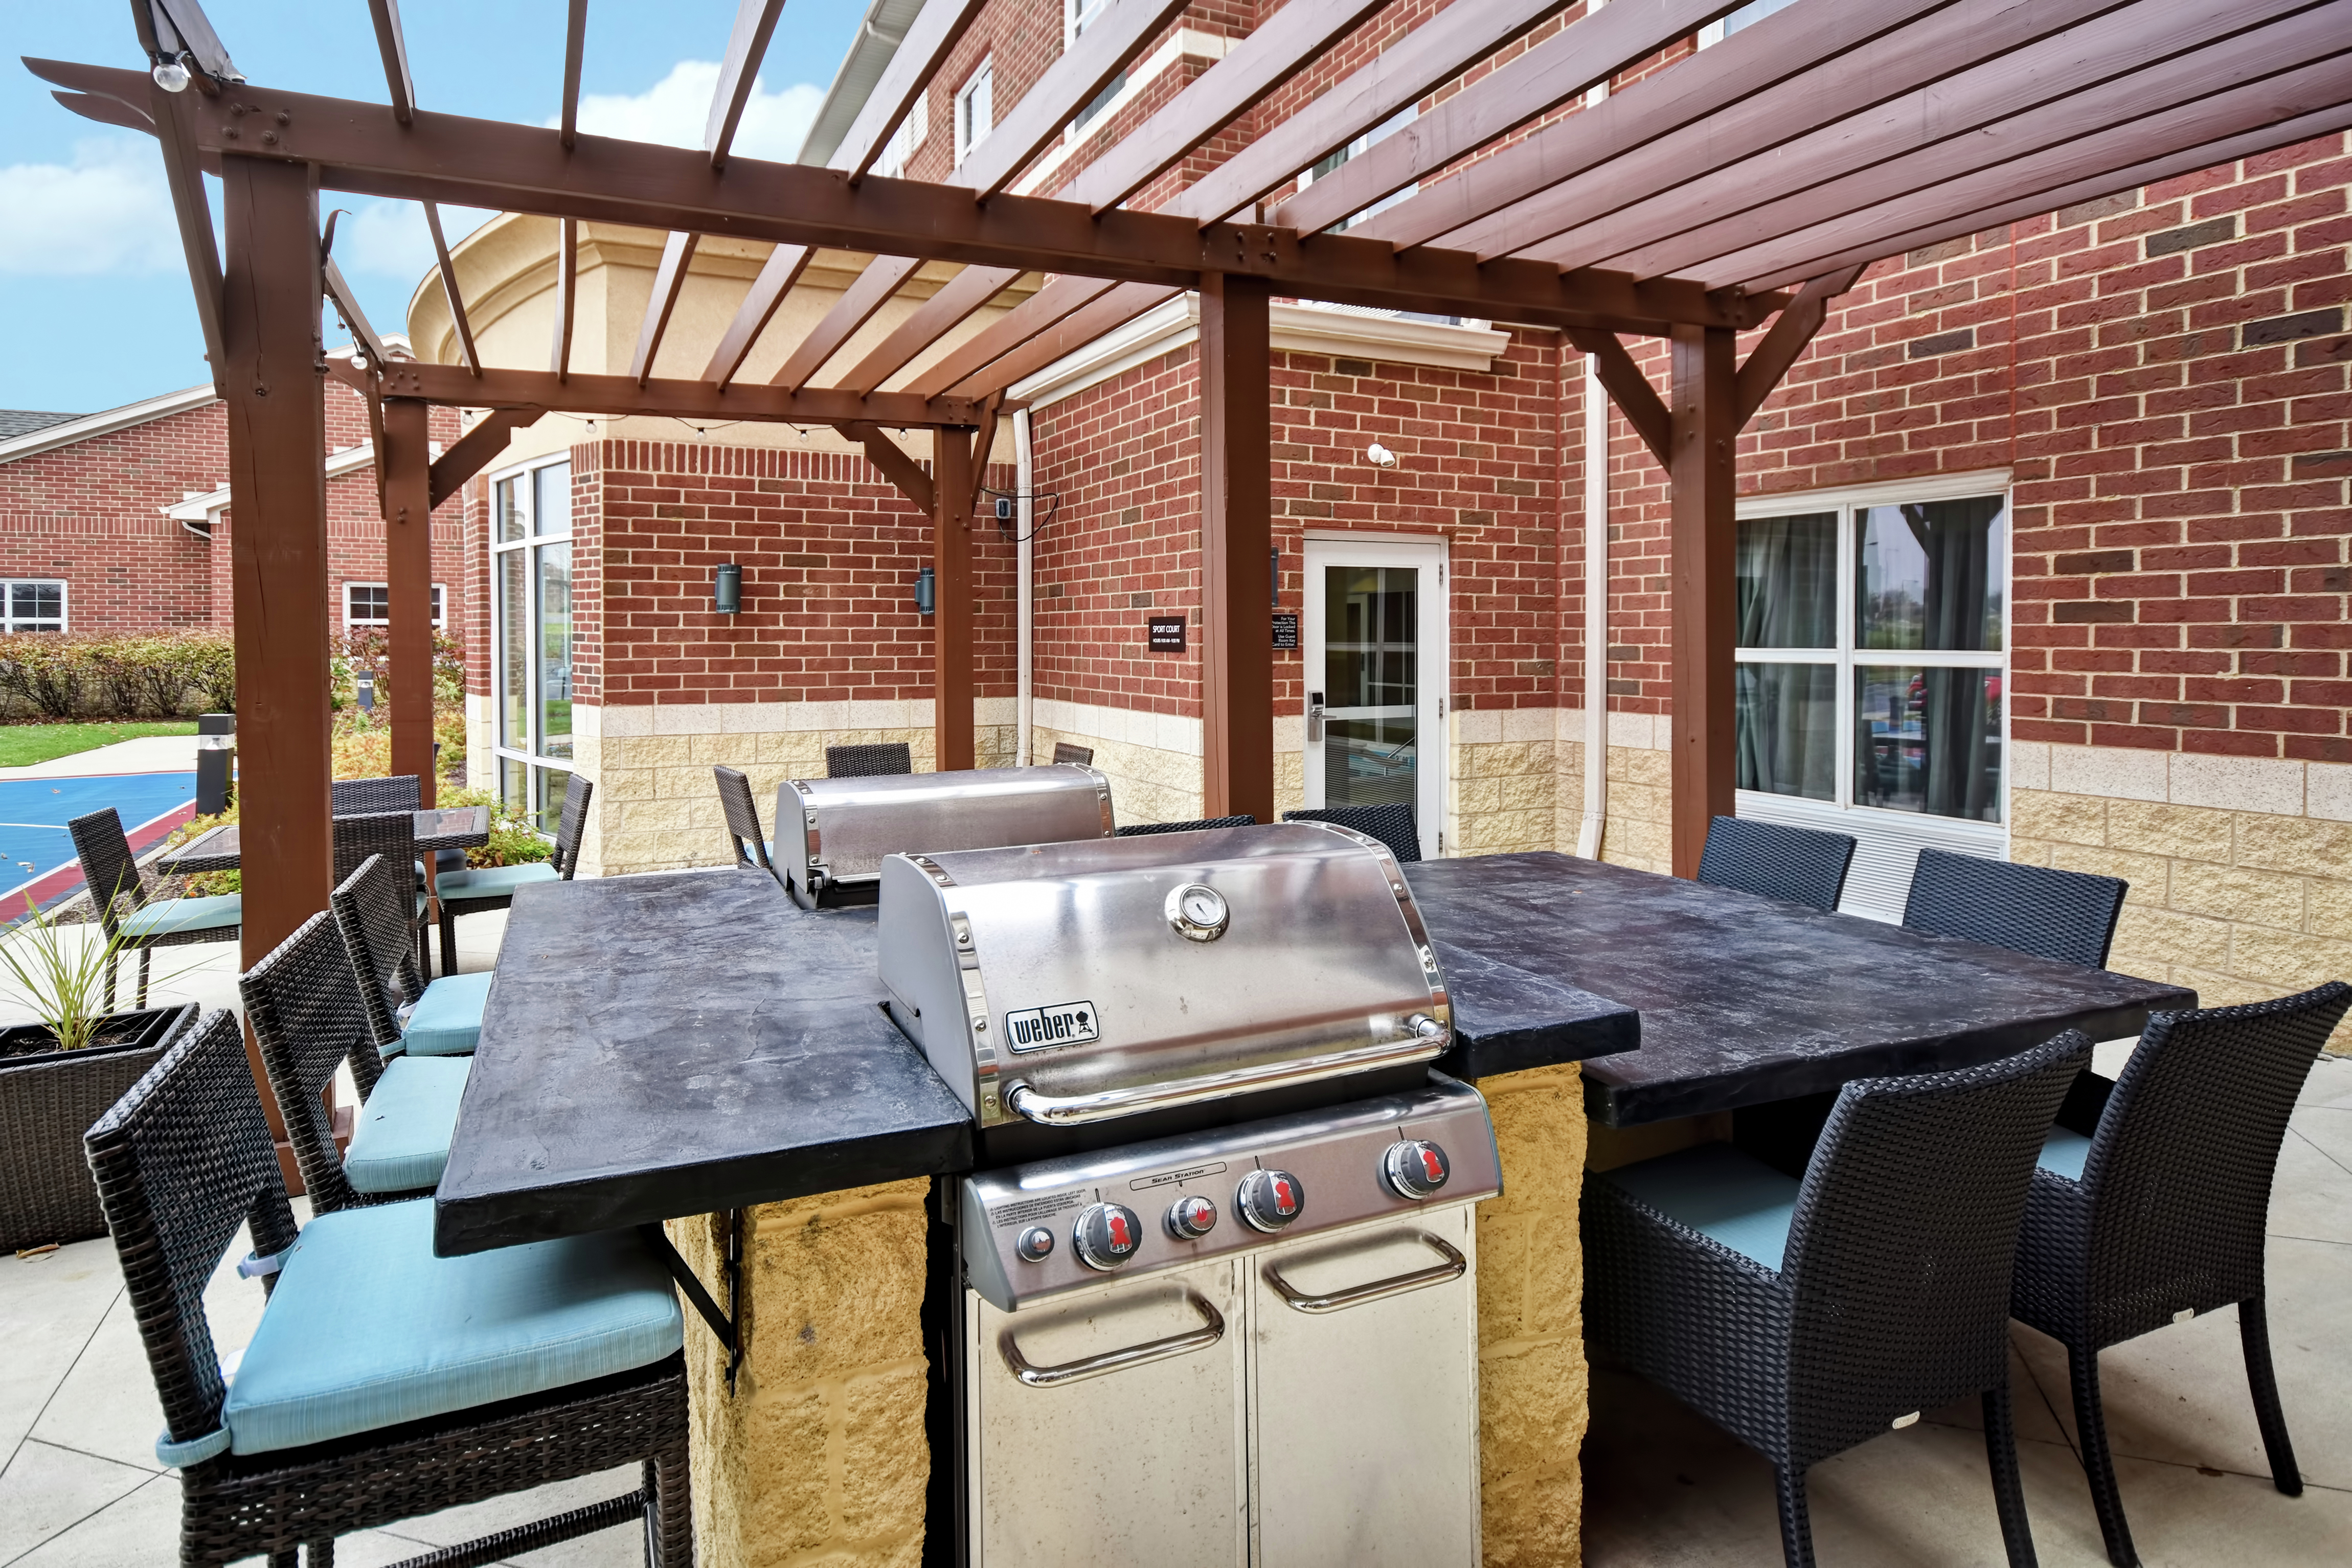 Grill Station and Dining Tables in Outdoor Patio Area